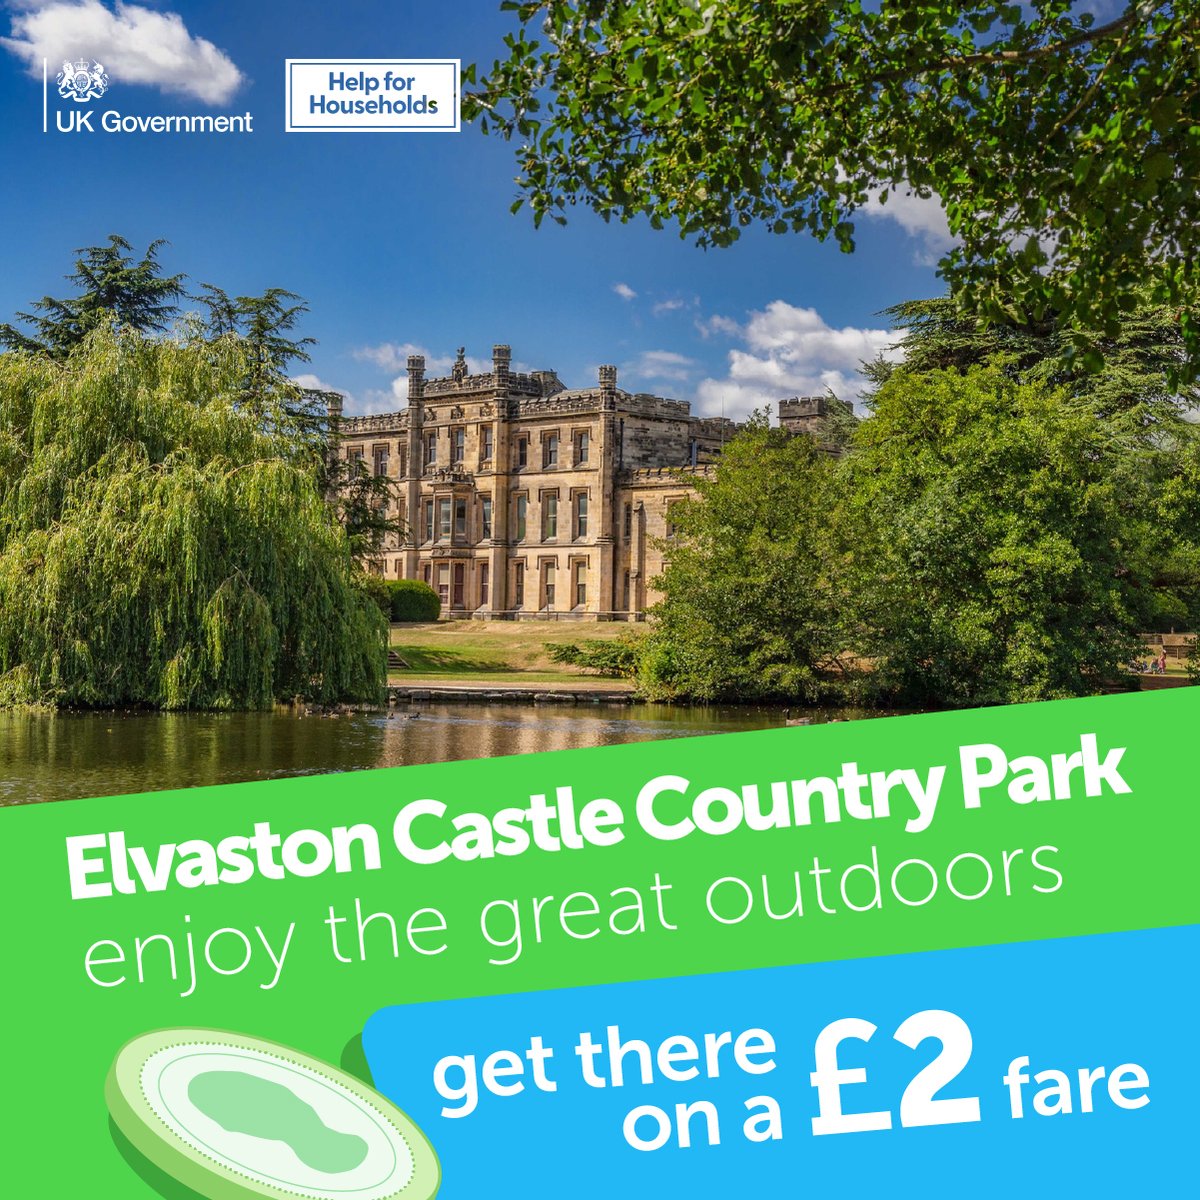 Enjoy some fresh air and discover new destinations🌳 Elvaston Castle Country Park is a historic estate with parkland, woodland and gardens near to Derby and Nottingham. Let us take you there on the £2 fare 🚍 Plan your trip today ⤵️ orlo.uk/3dwPp